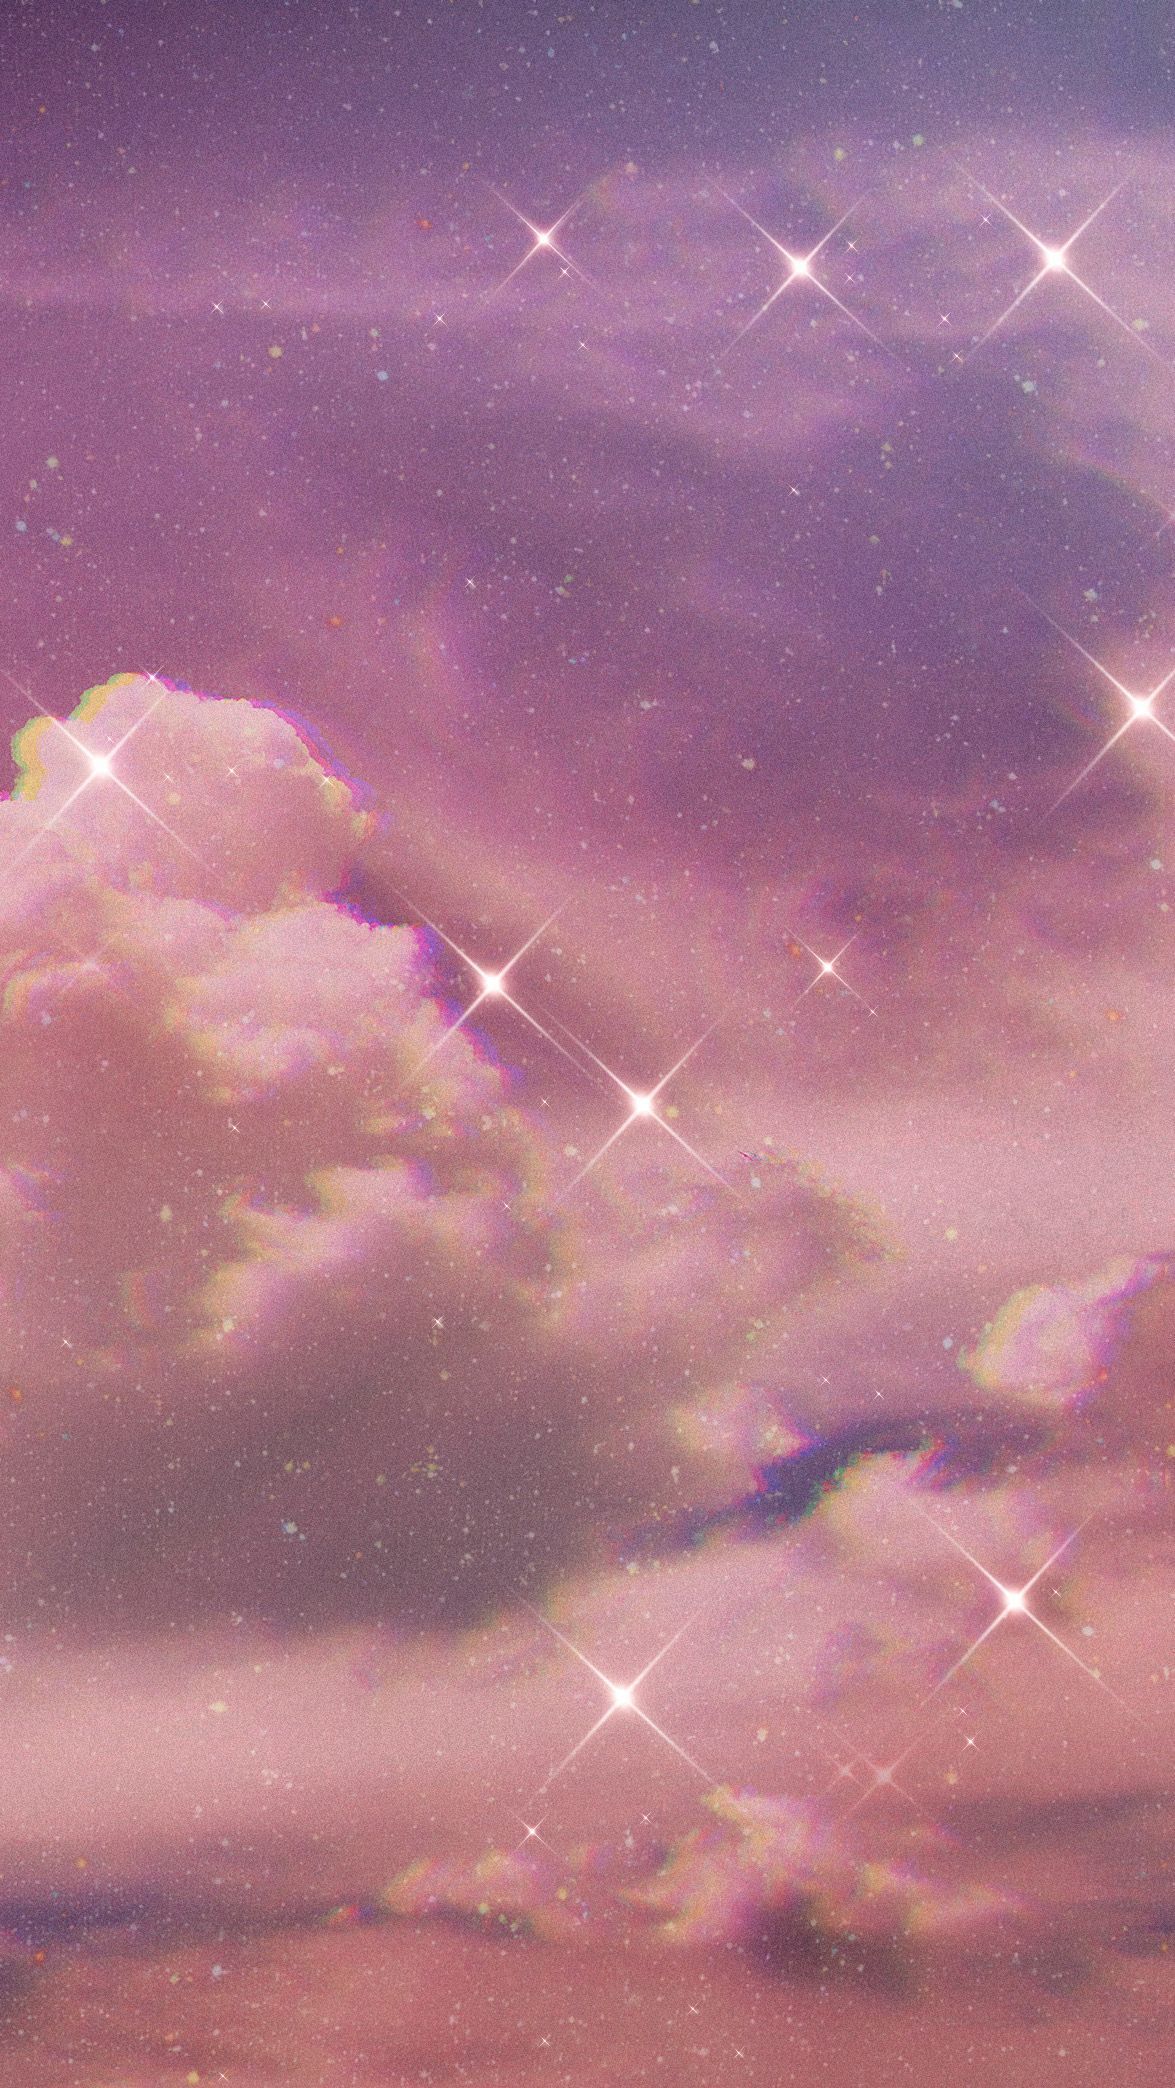 Aesthetic phone background of a pink and purple sky with sparkles - Phone, glitter, stars, constellation